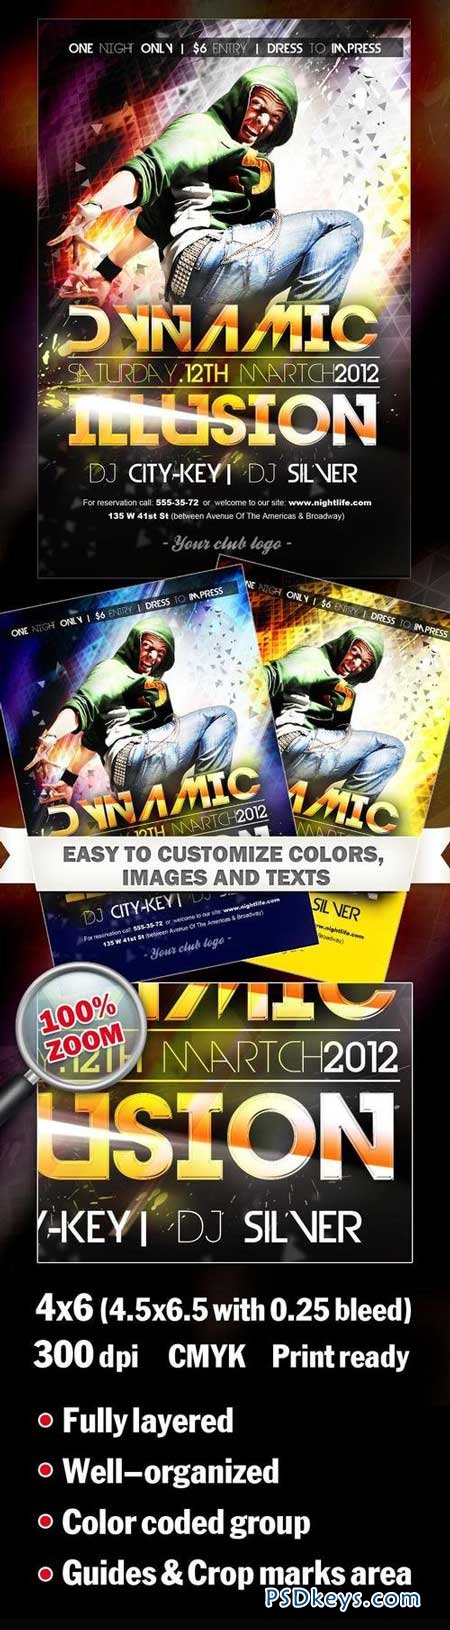 Dynamic Illusion - Flyer Poster PSD Template